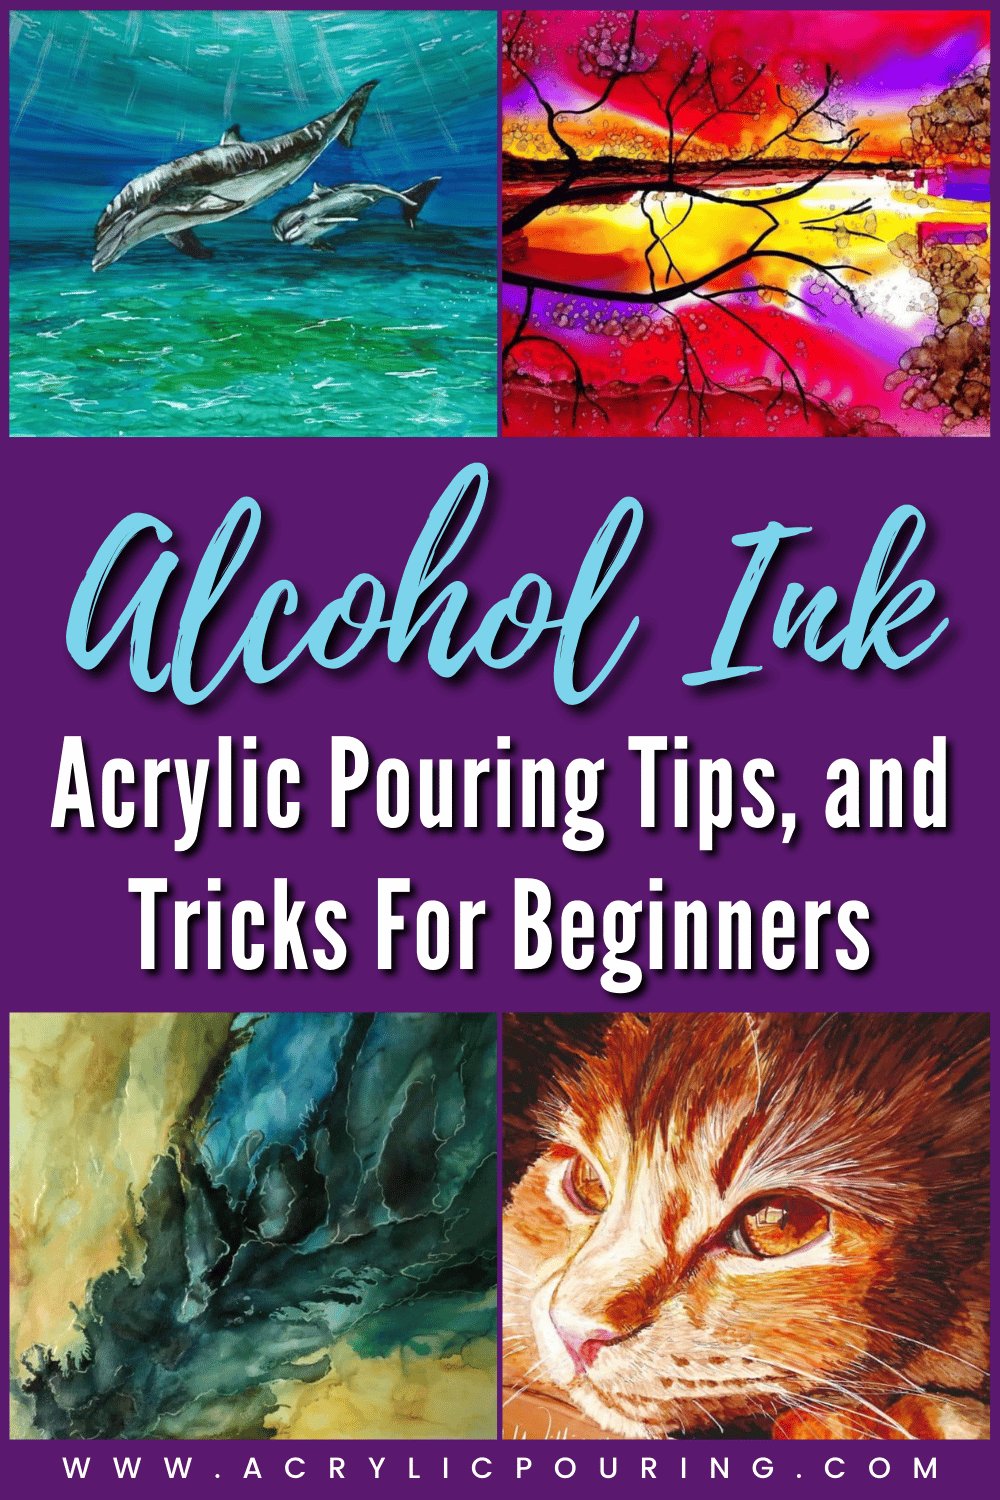 Alcohol ink art is an incredibly fun and absolutely vibrant art form in which anyone can get involved, no matter their previous art experience. While alcohol inks can seem a little difficult to master at the beginning, I can assure you that they are rewarding and worth the journey of learning the medium. The possibilities are only limited to what you are willing to try. Here is your complete guide on how to use alcohol inks and produce amazing art work! 